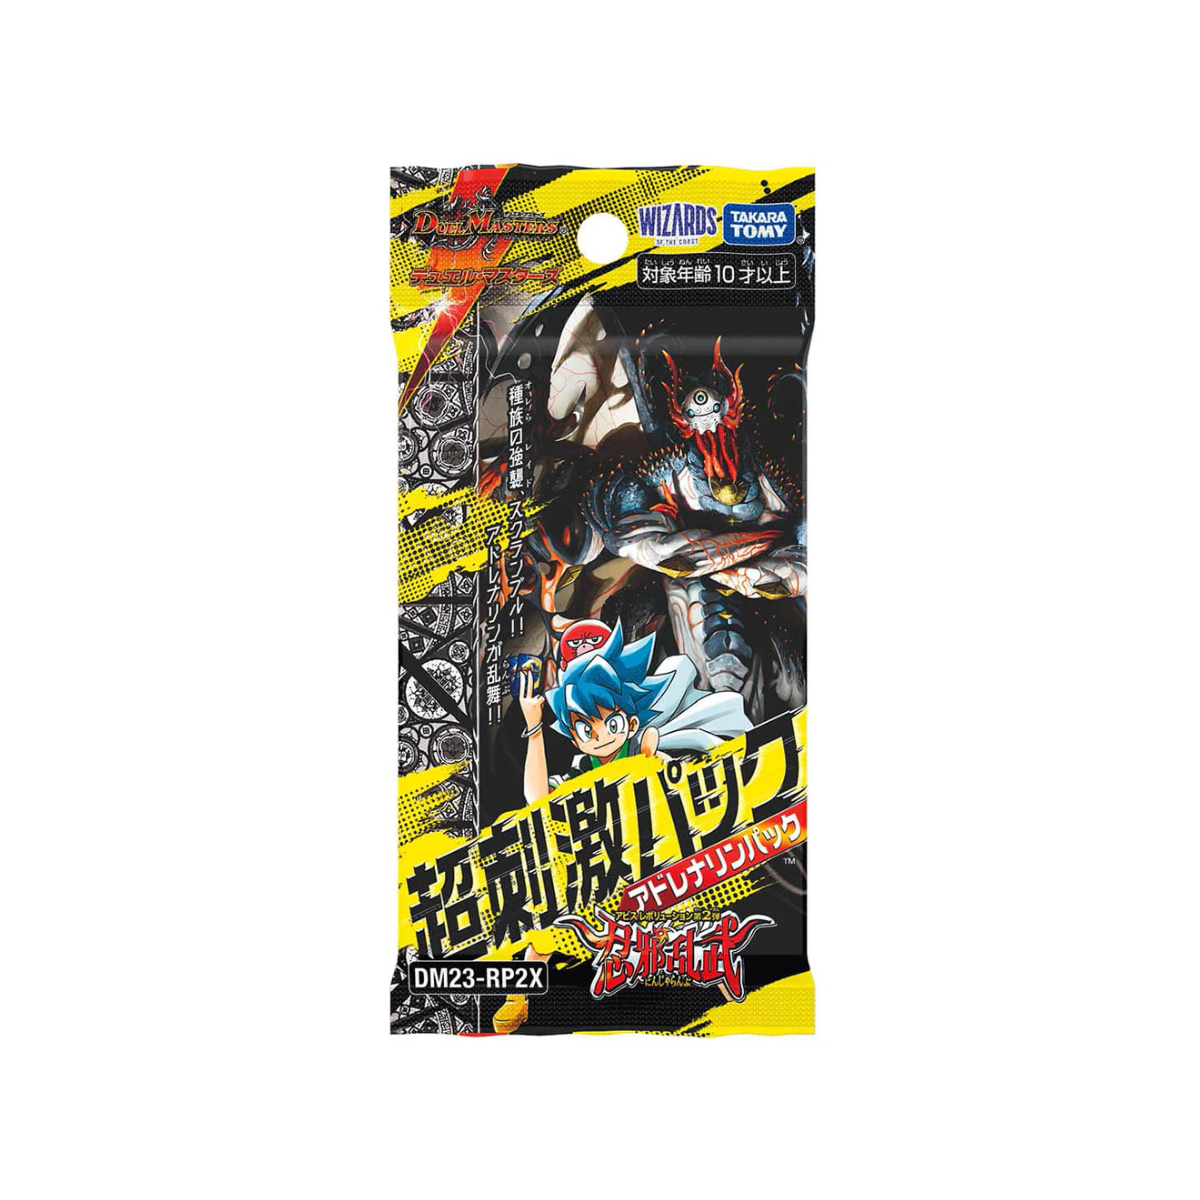 Duel Masters TCG Abyss Revolution Vol. 2 "Shinobi Evil Ran Take" (Super Stimulation Pack) [DM23-RP2X] (Japanese)-Booster Box (8pcs)-Takara Tomy-Ace Cards & Collectibles